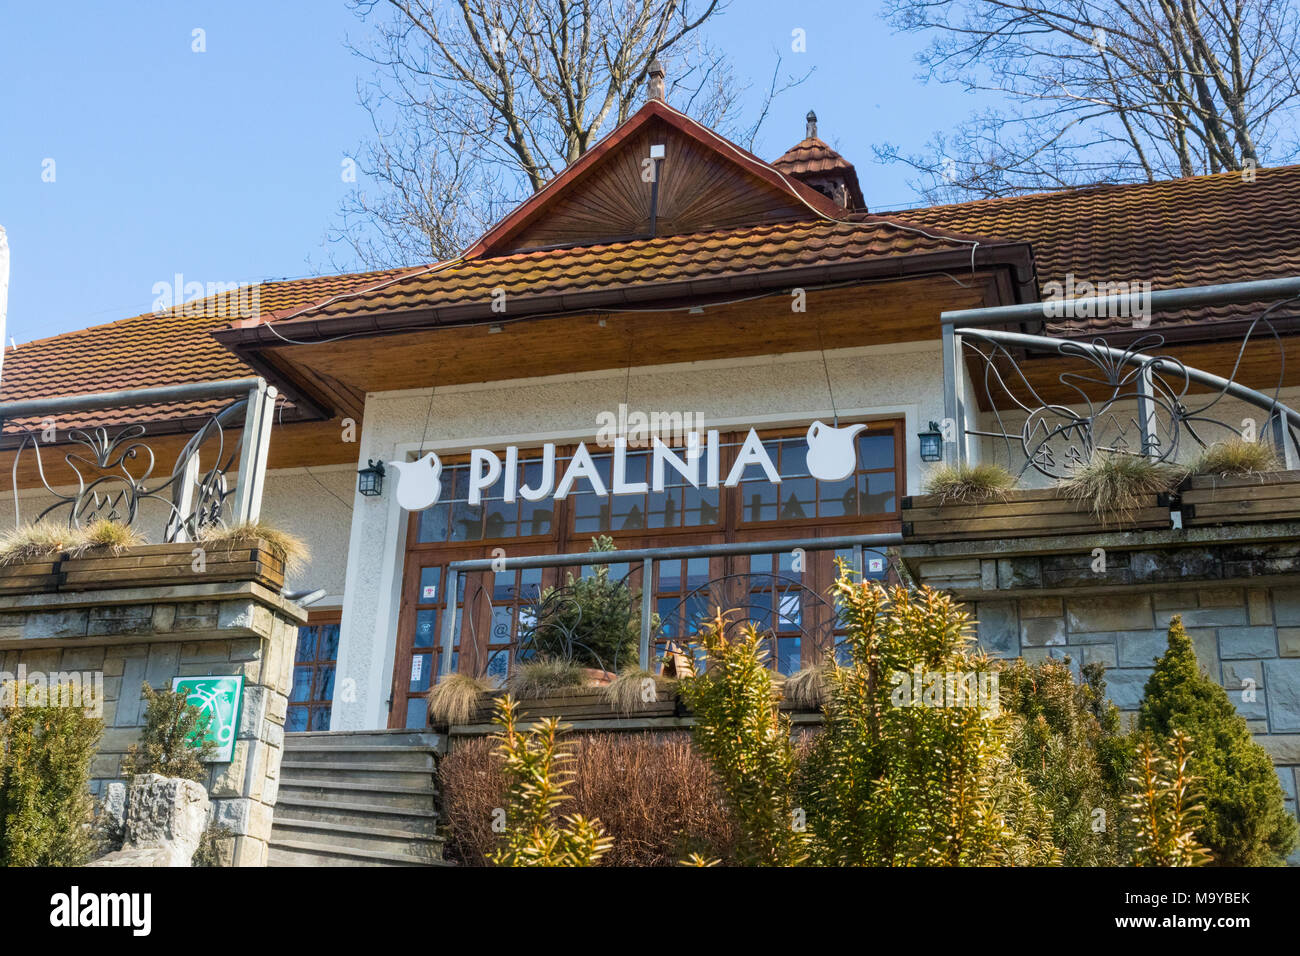 Pijalnia (translates as 'drinking hall) in Piwniczna, which hosts a natural source of mineral water and a artistic cafe in Piwniczna, Poland. Stock Photo